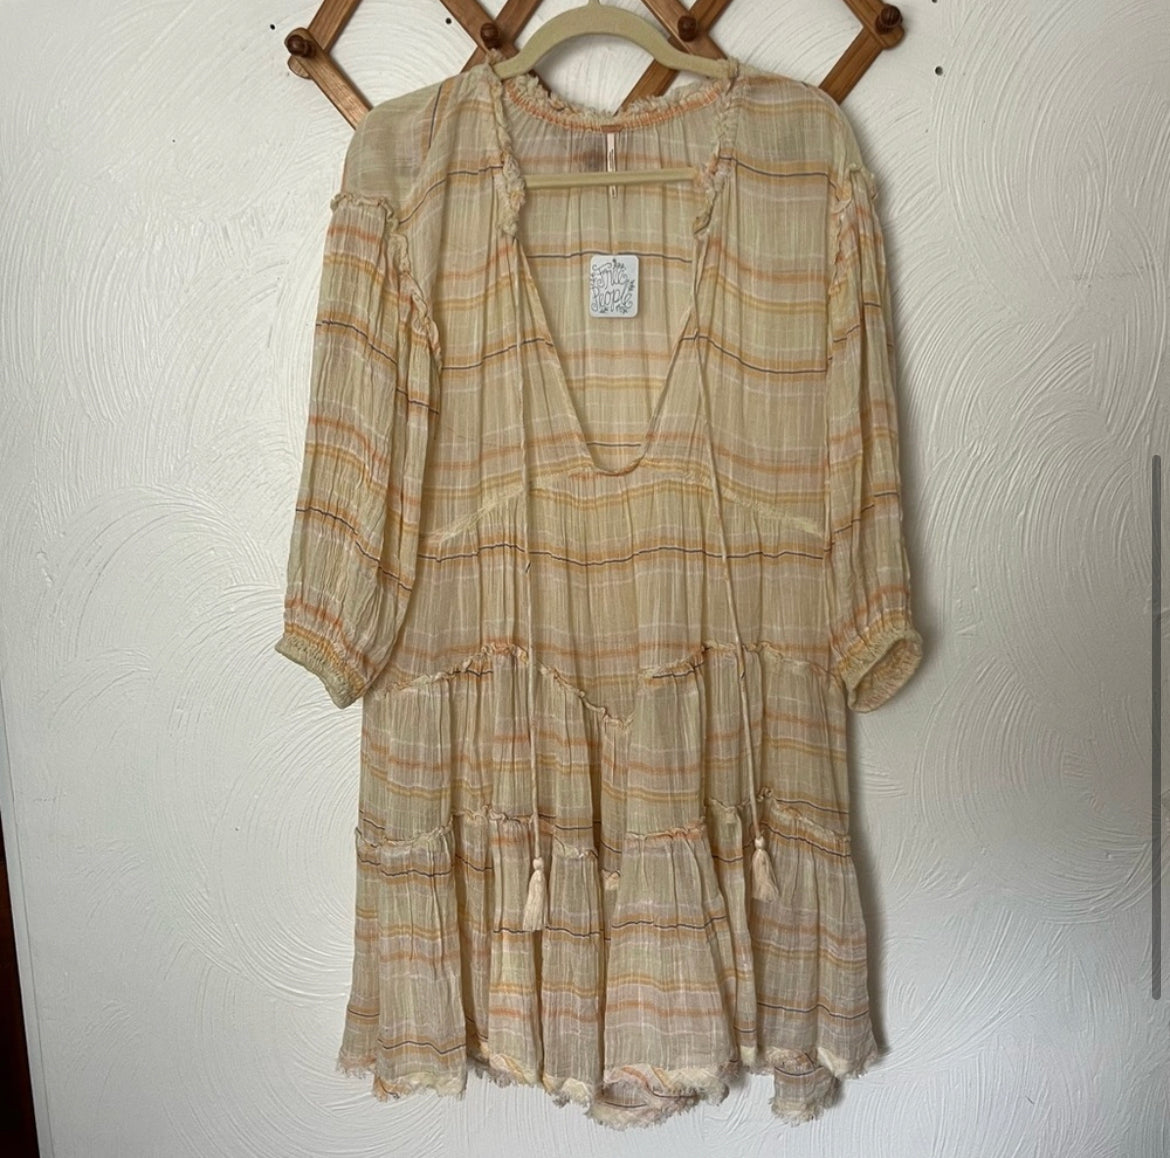 Free People Gianna Stripe Tunic in Neutral (S) NWT!